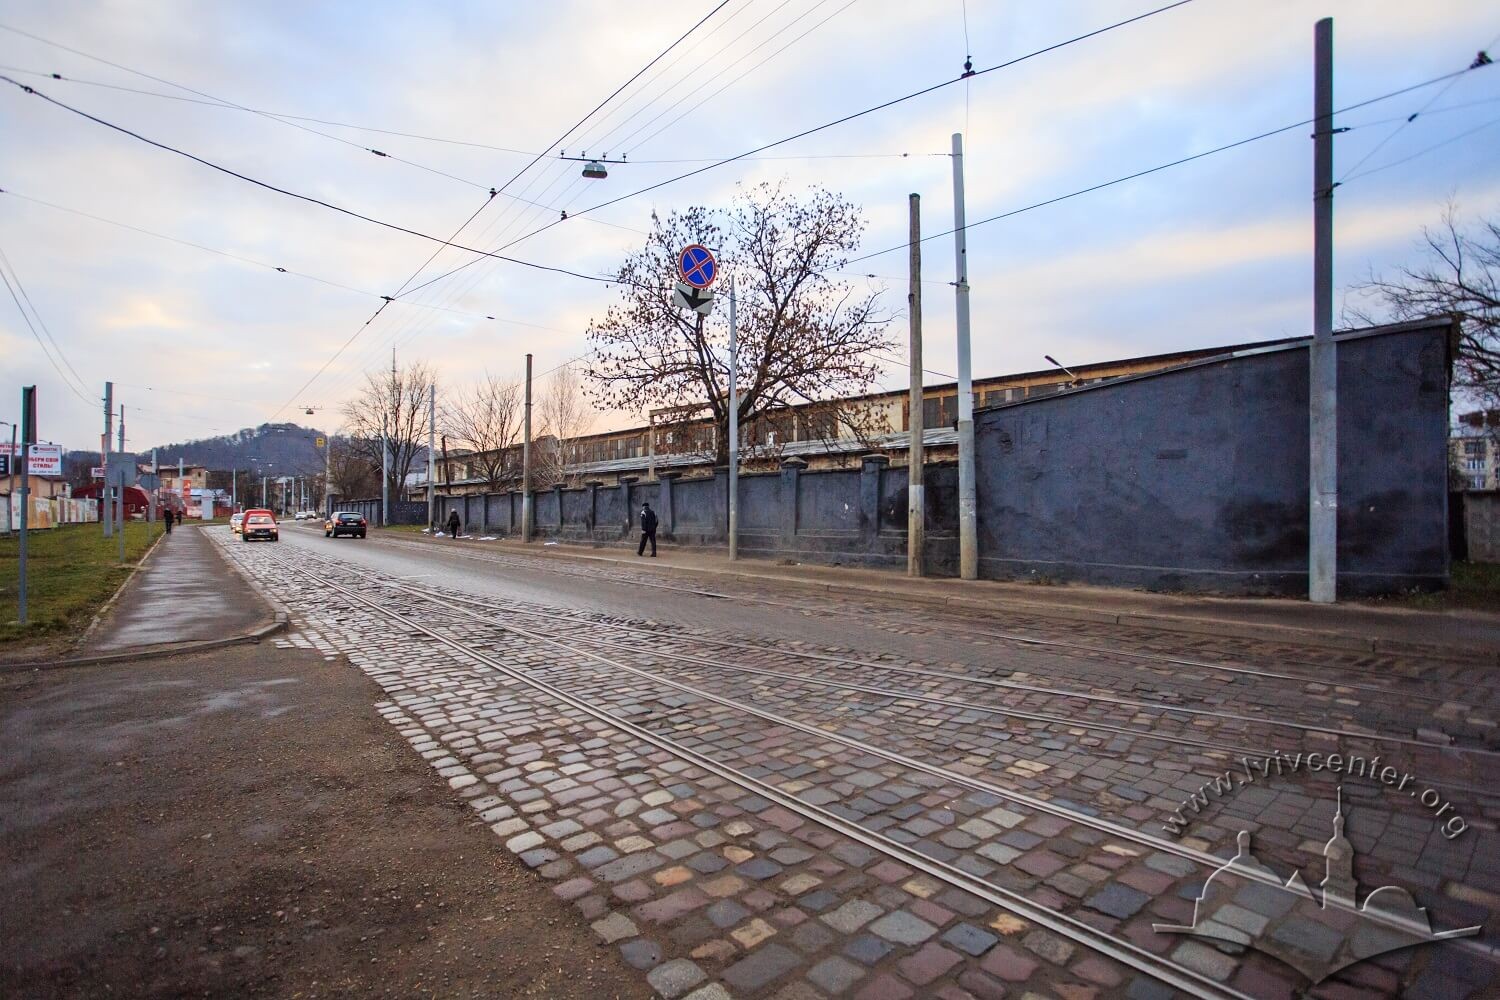 Vul. Promyslova, 29. Behind the fence on the right – the tram depot building which does not function today/Photo courtesy of Nazarii Parkhomyk, 2015